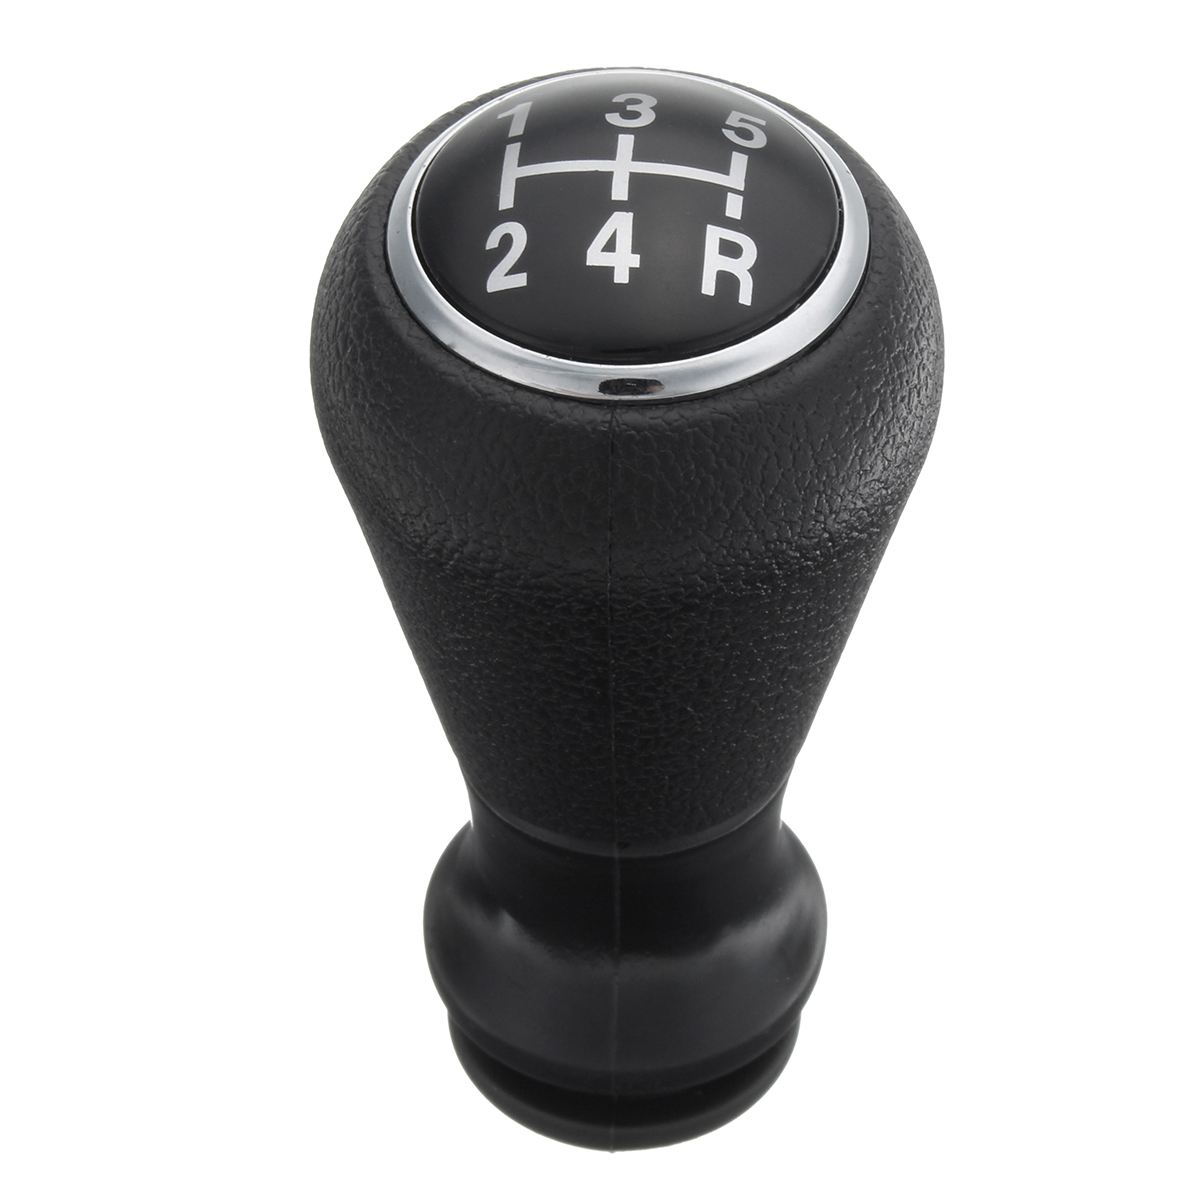 

5 Speed Manual Car Gear Shift Knob For Peugeot 106 206 306 406 806 107 207 307